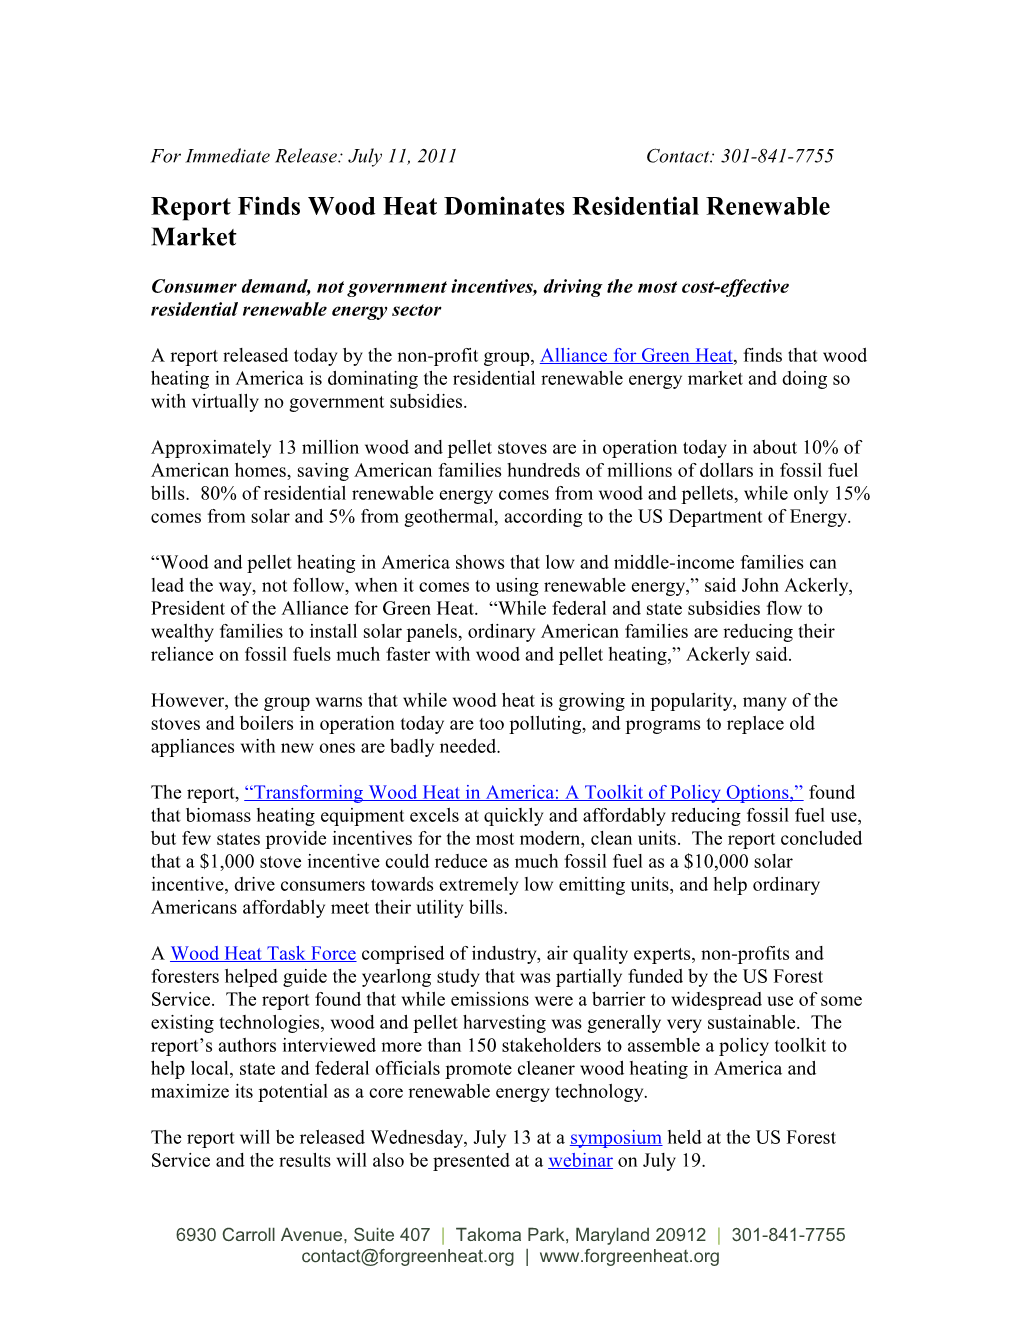 Report Finds Wood Heat Dominates Residential Renewable Market